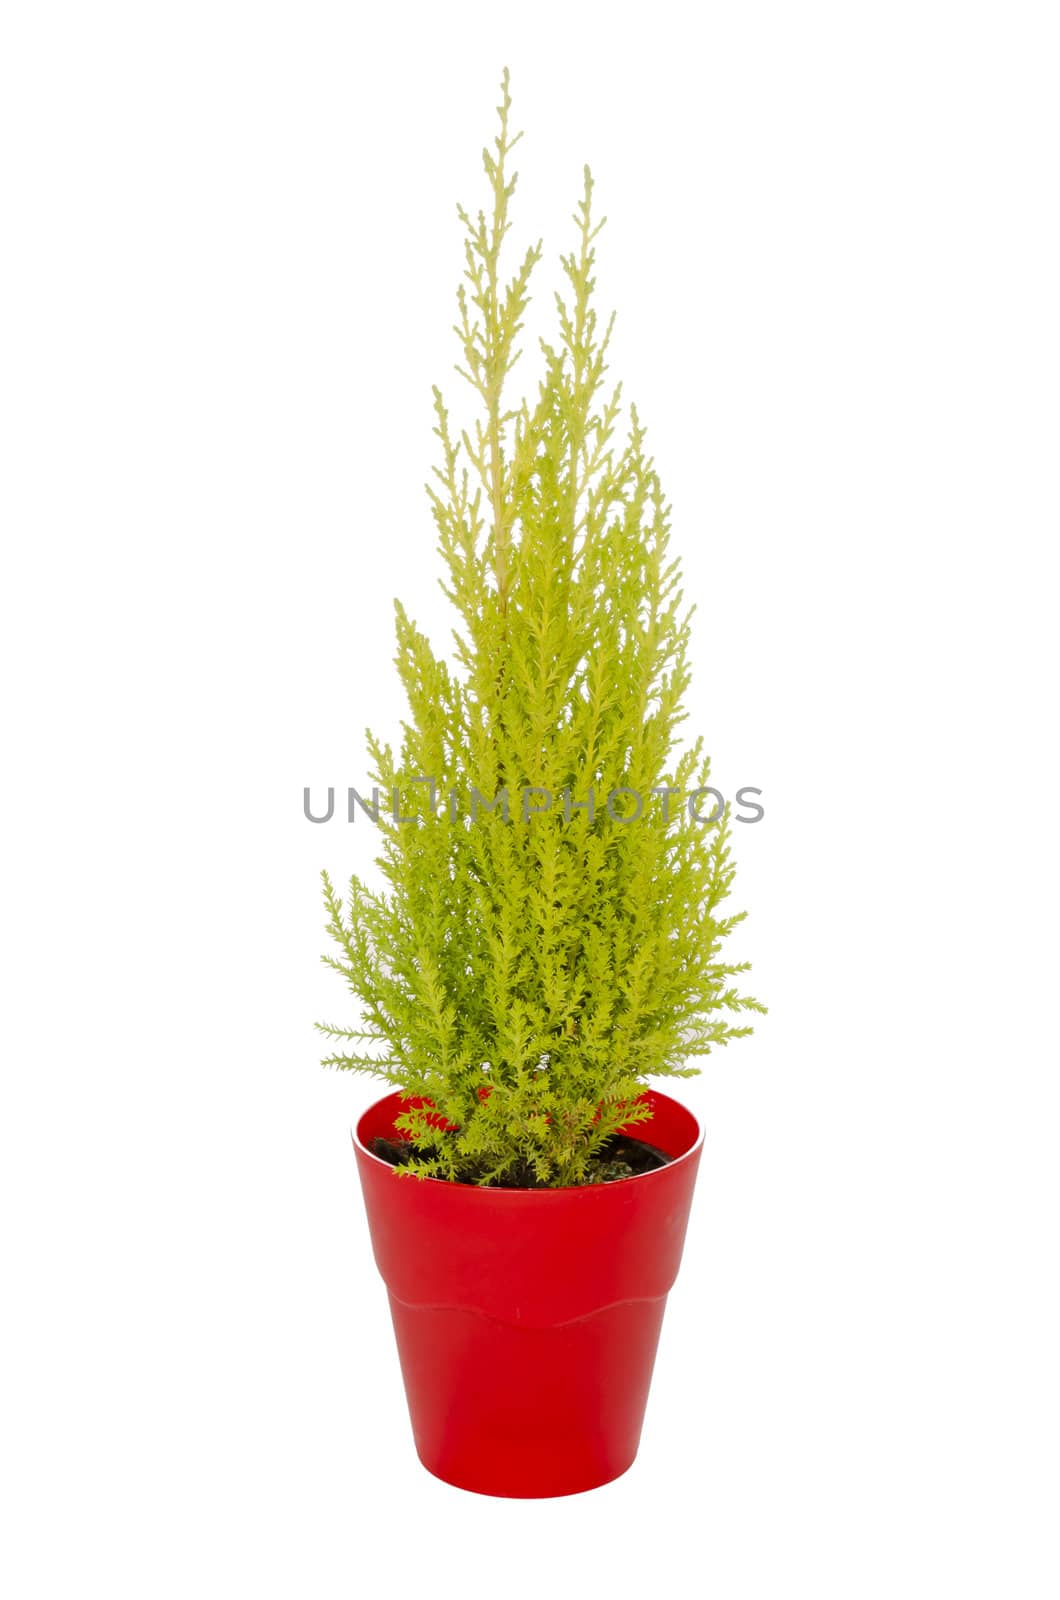 green fir in a red pot isolated on a white background